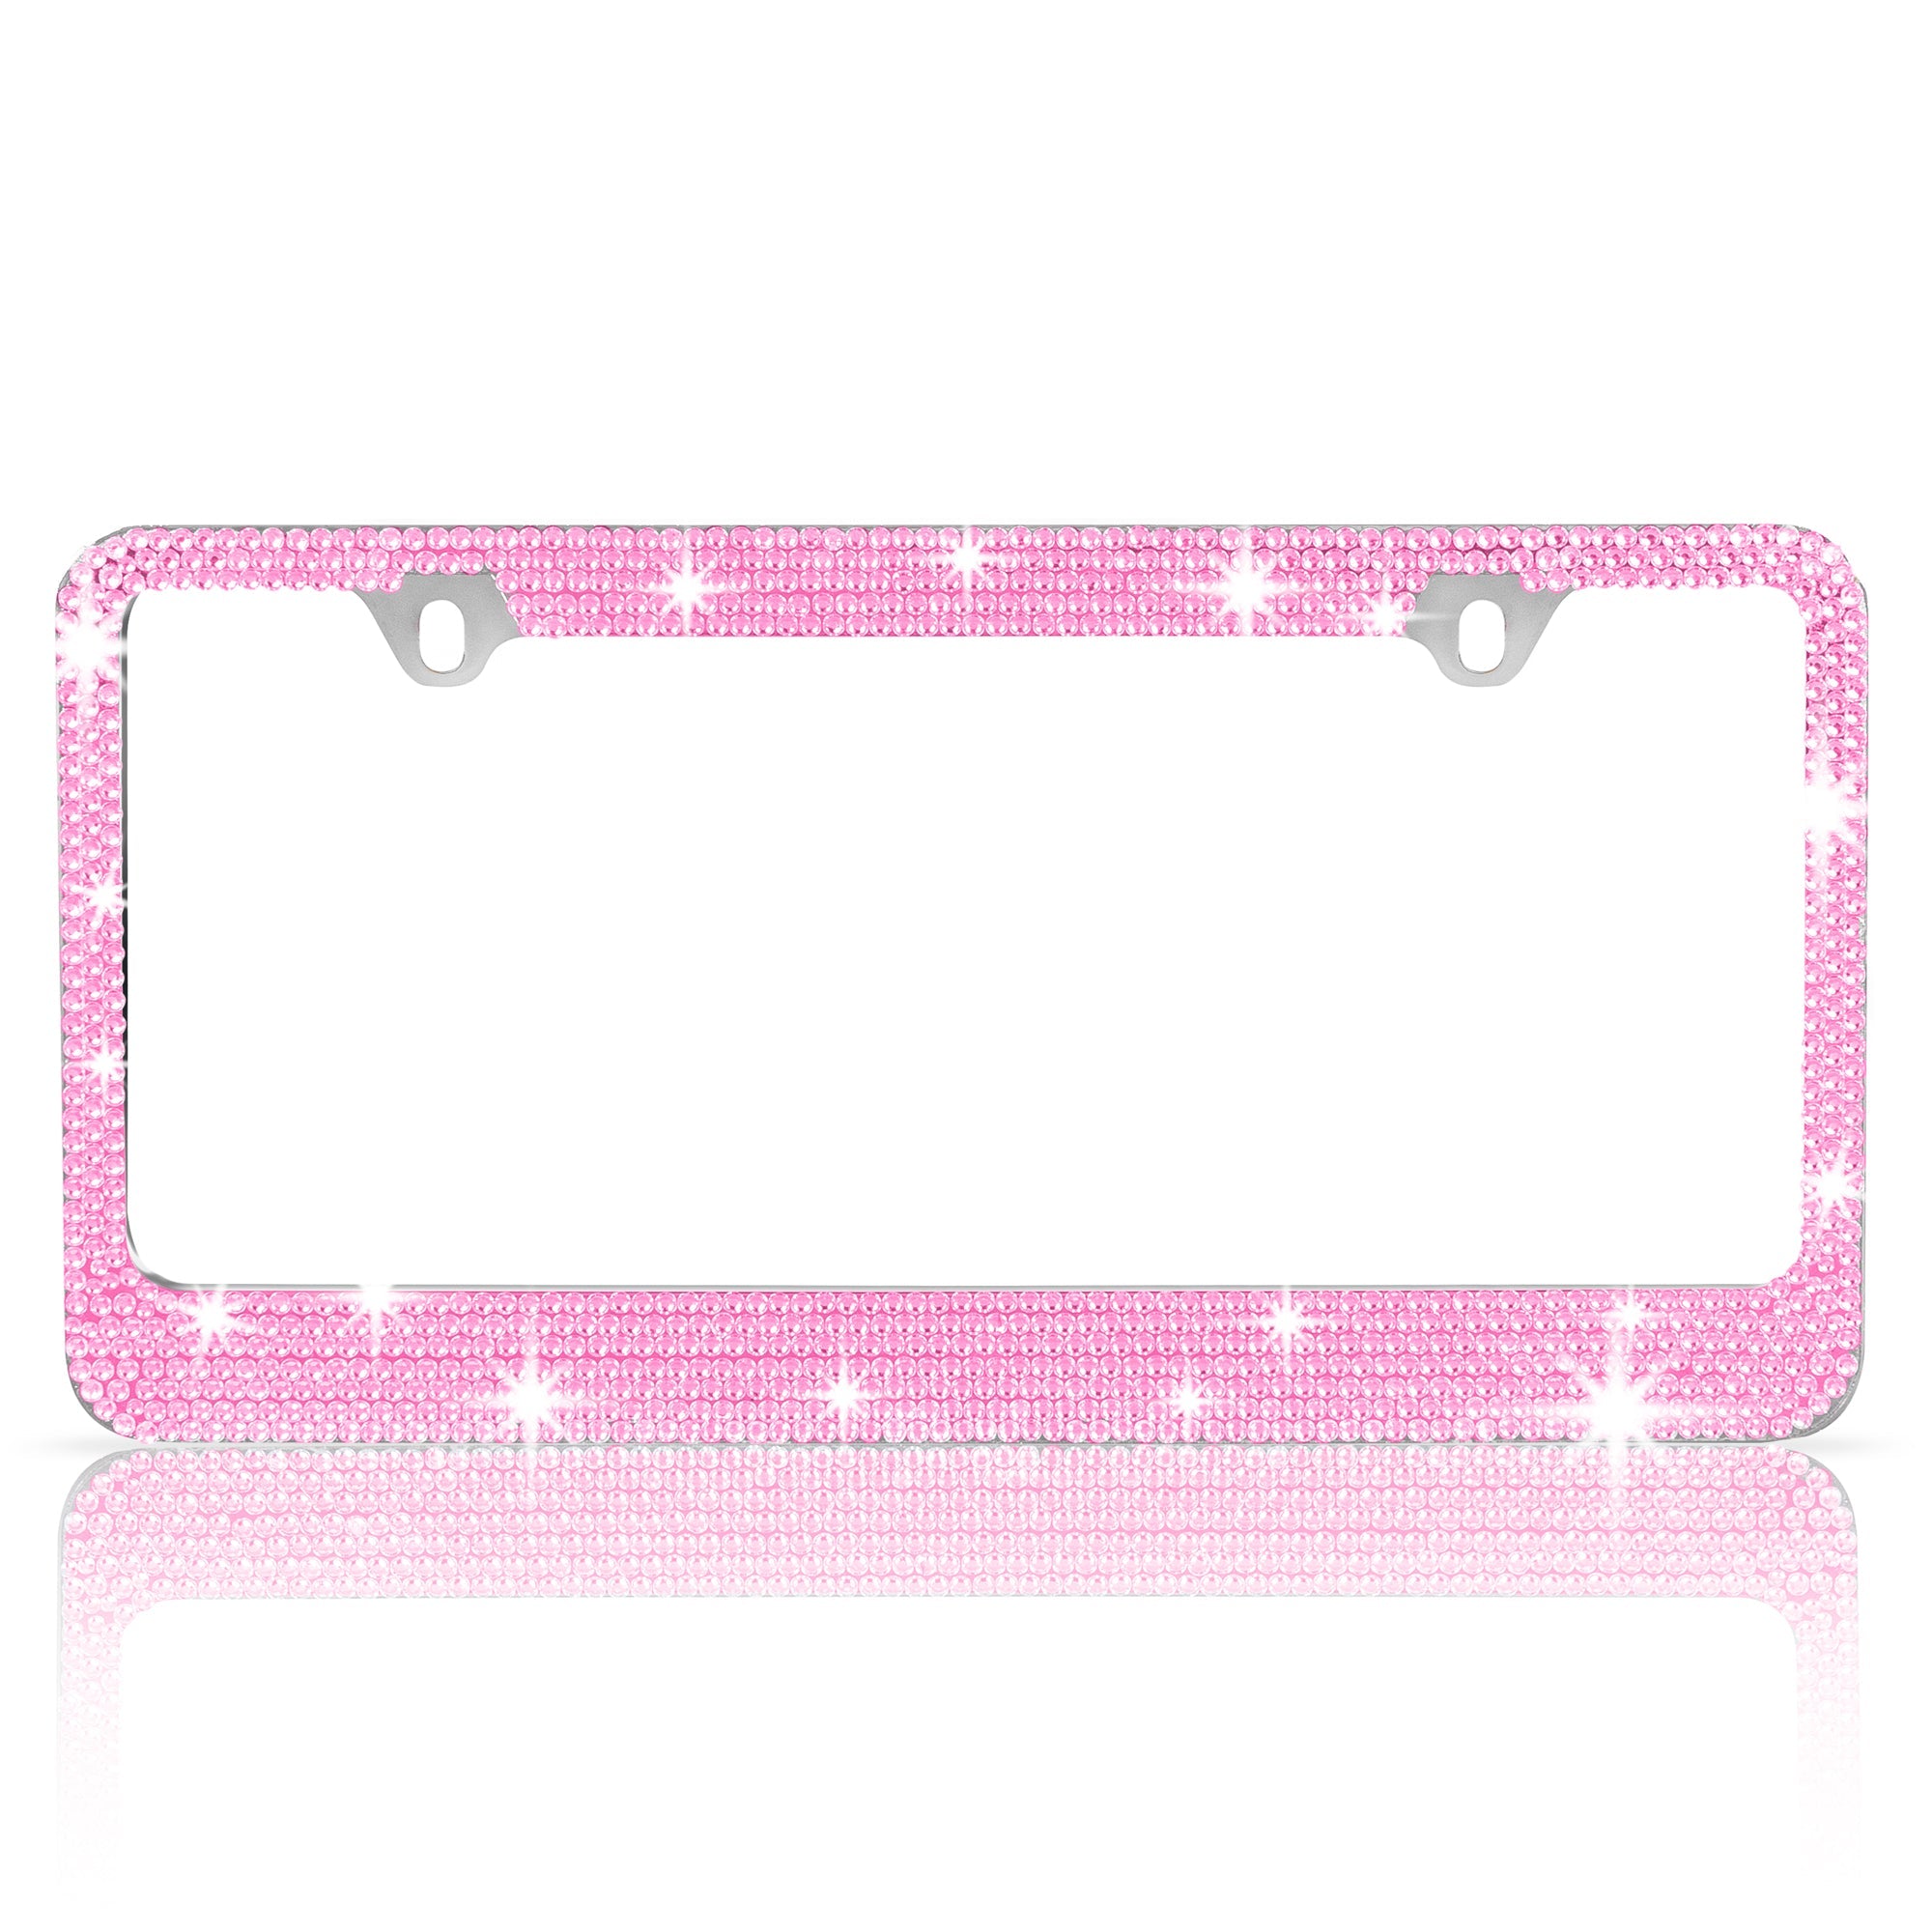 Stainless Steel Pink Sparkly Sparkling Diamond Crystal Bling Premium License Plate Frame Metal Silver Rhinestone for Women Universal Size for Car Truck SUV (Pack of 2) - 2-Pack